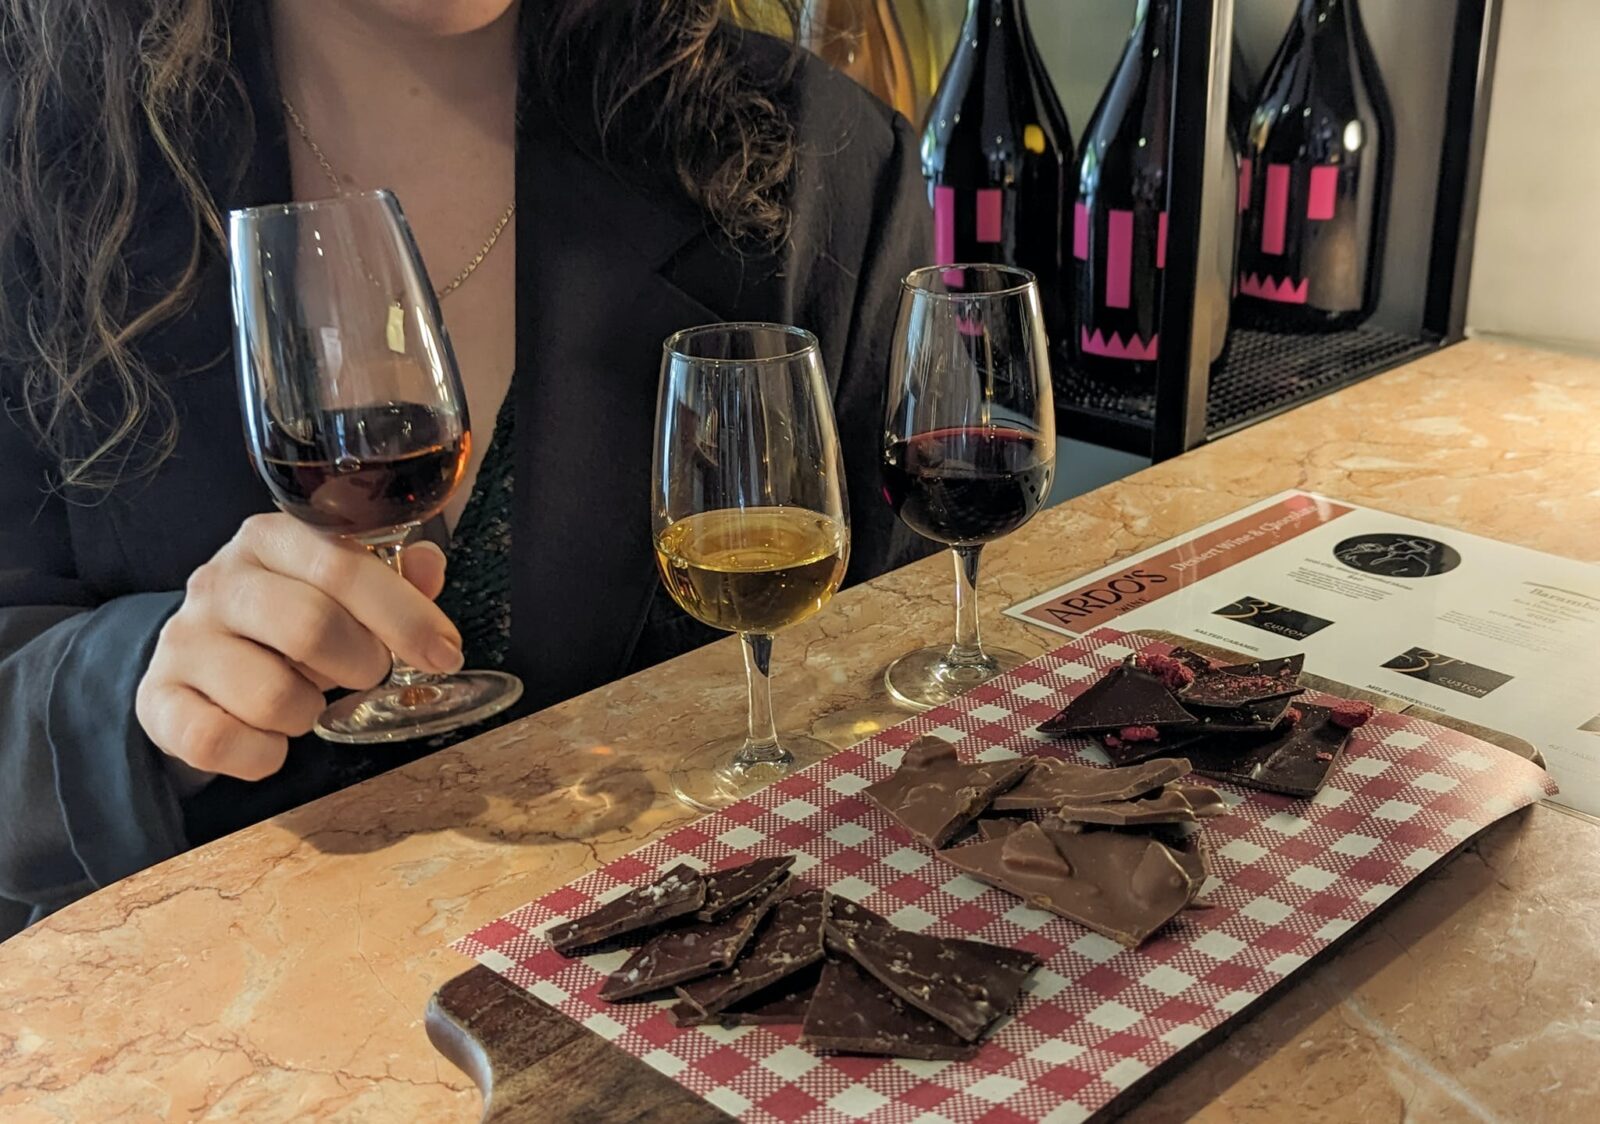 3 Wine and 3 Varities of chocolate on a board with educational display